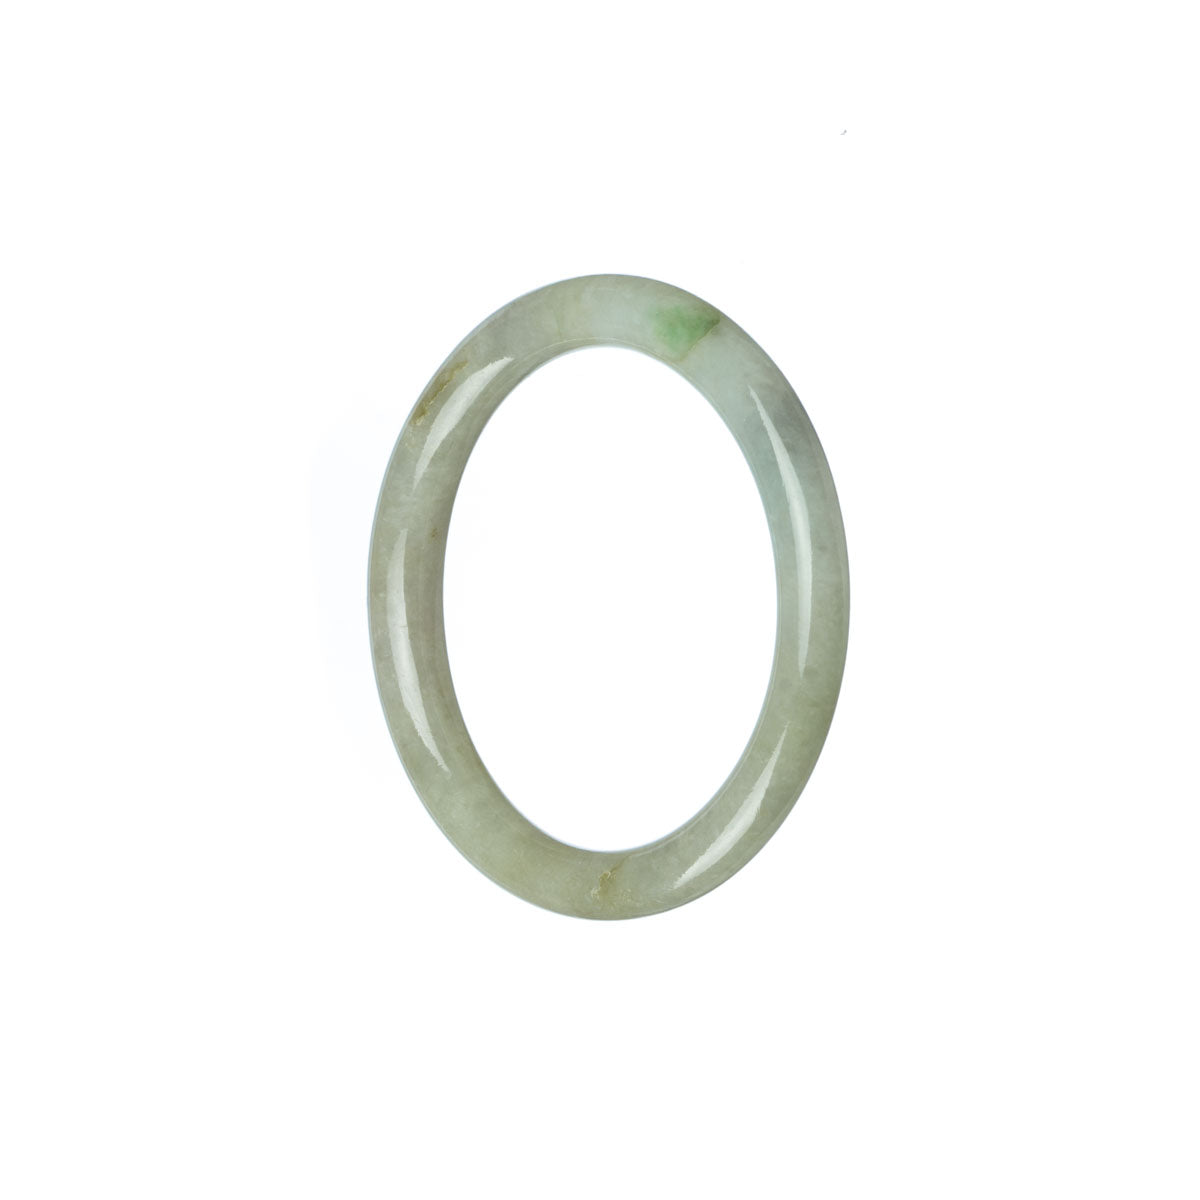 A round child-sized bracelet made of authentic natural green and white jade.